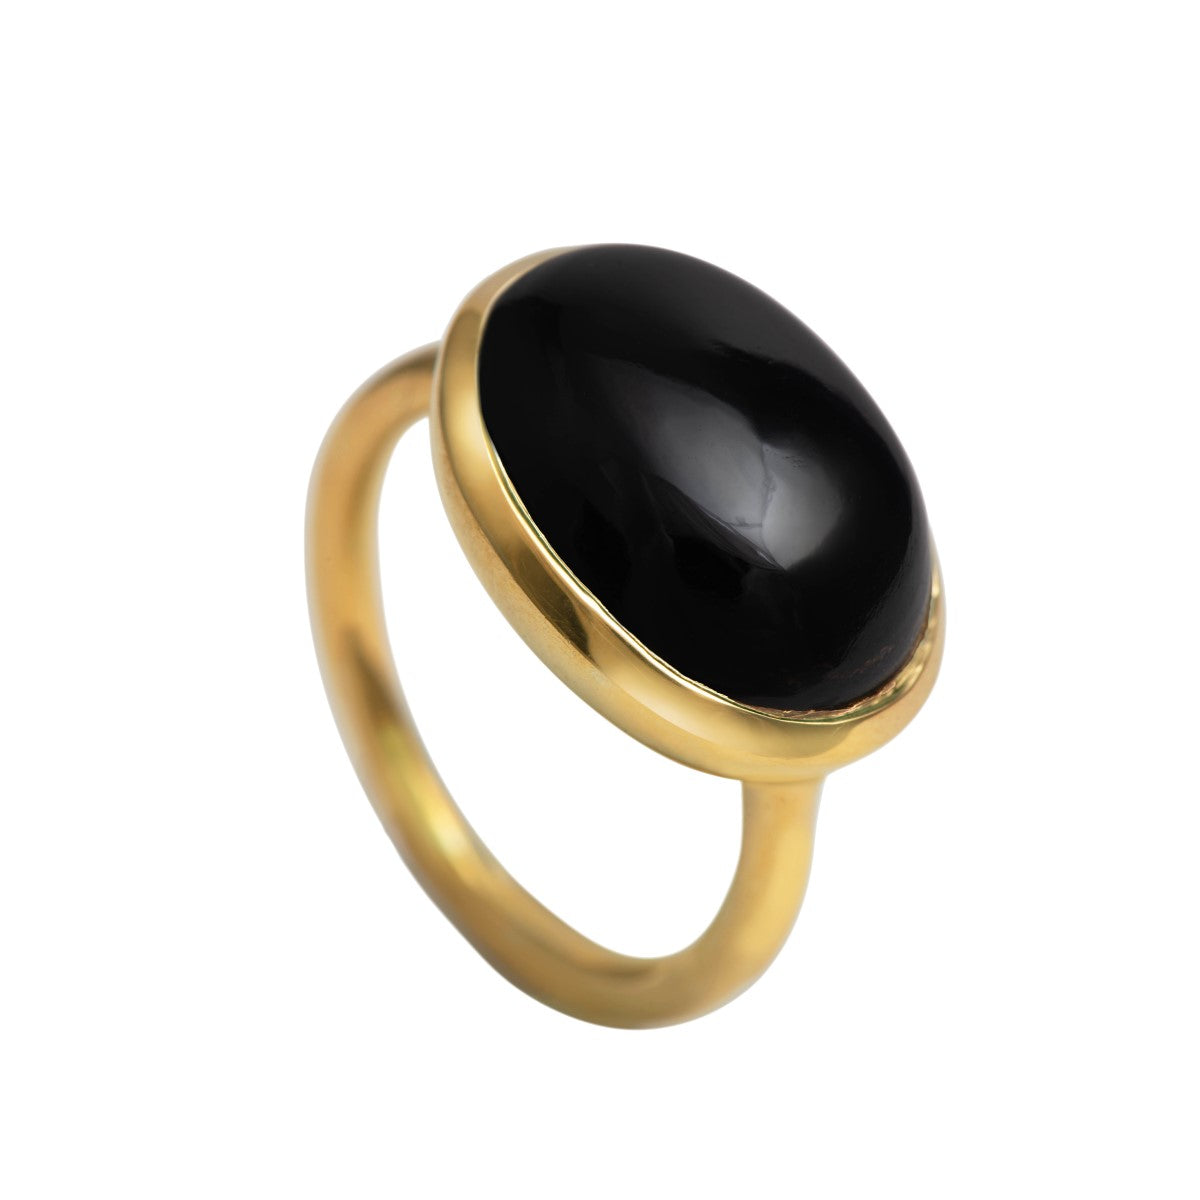 Cabochon Oval Cut Natural Gemstone Gold Plated Sterling Silver Ring - Black Onyx